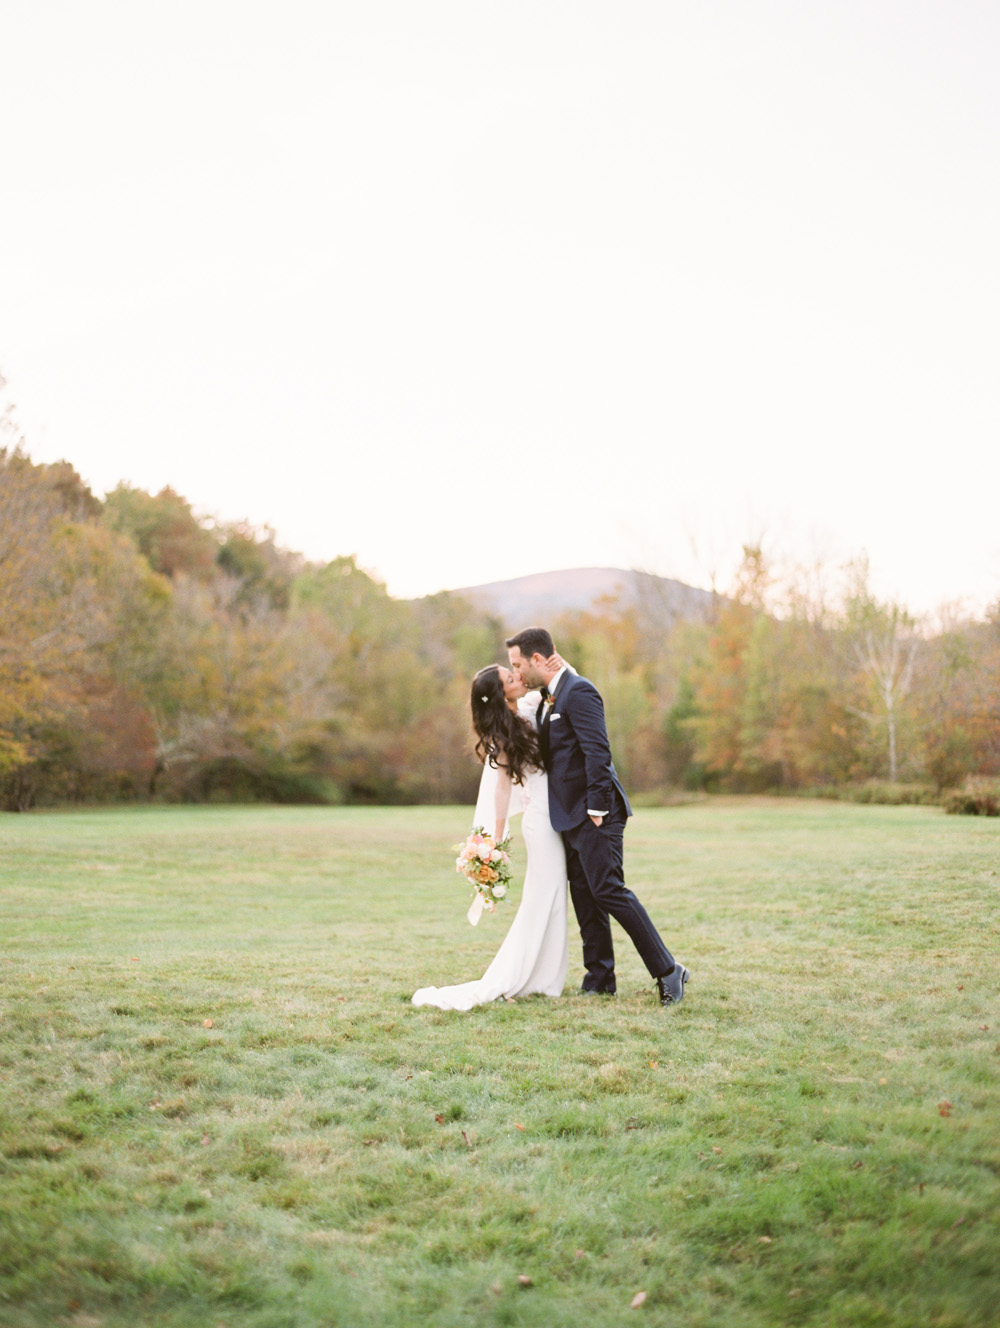 Kiss in the field at Full Moon Resort after their ceremony | Mary Dougherty